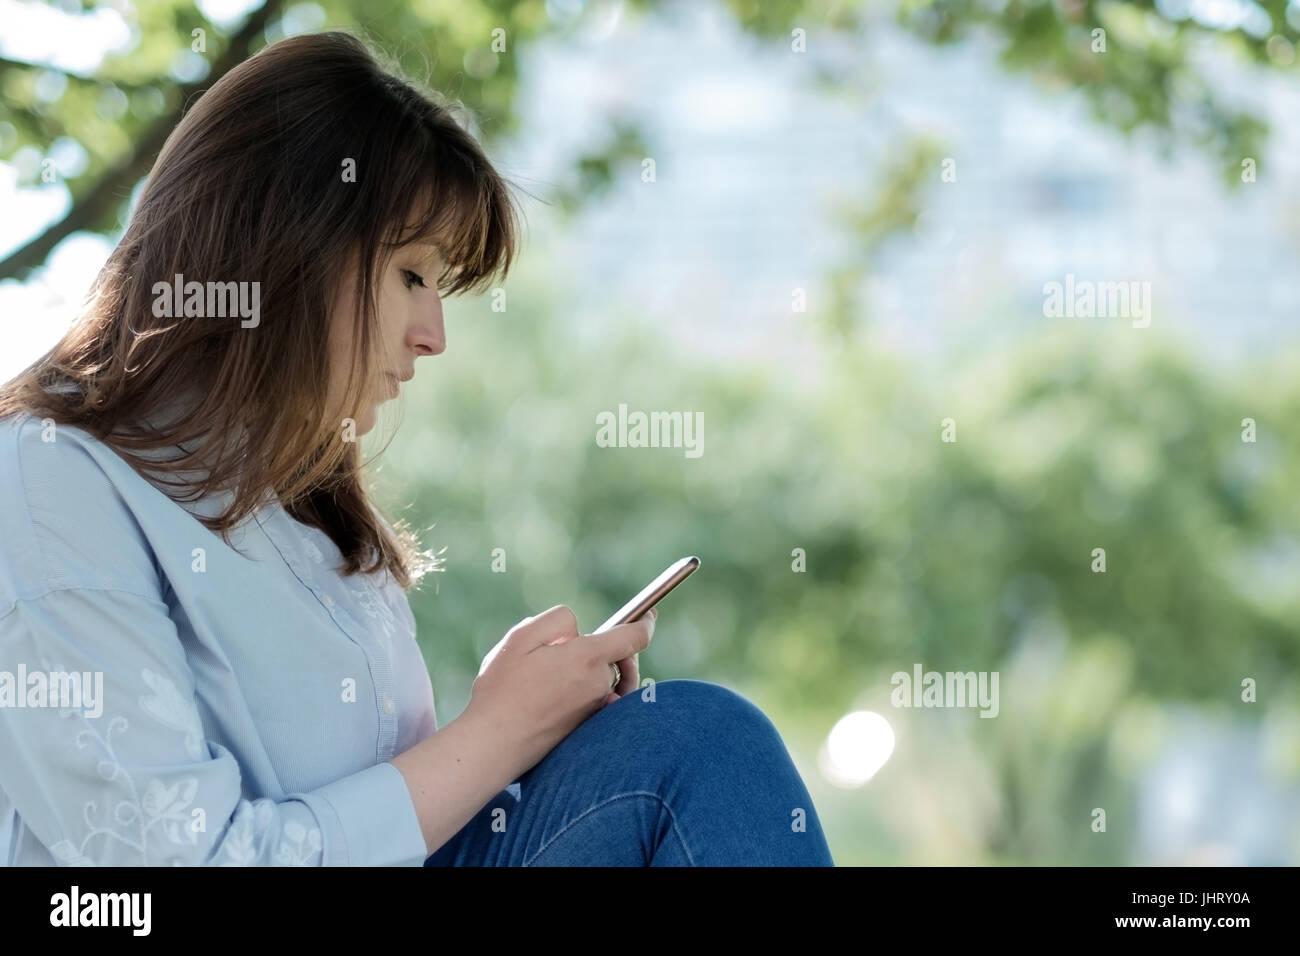 Young woman with a mobile phone in nature Stock Photo